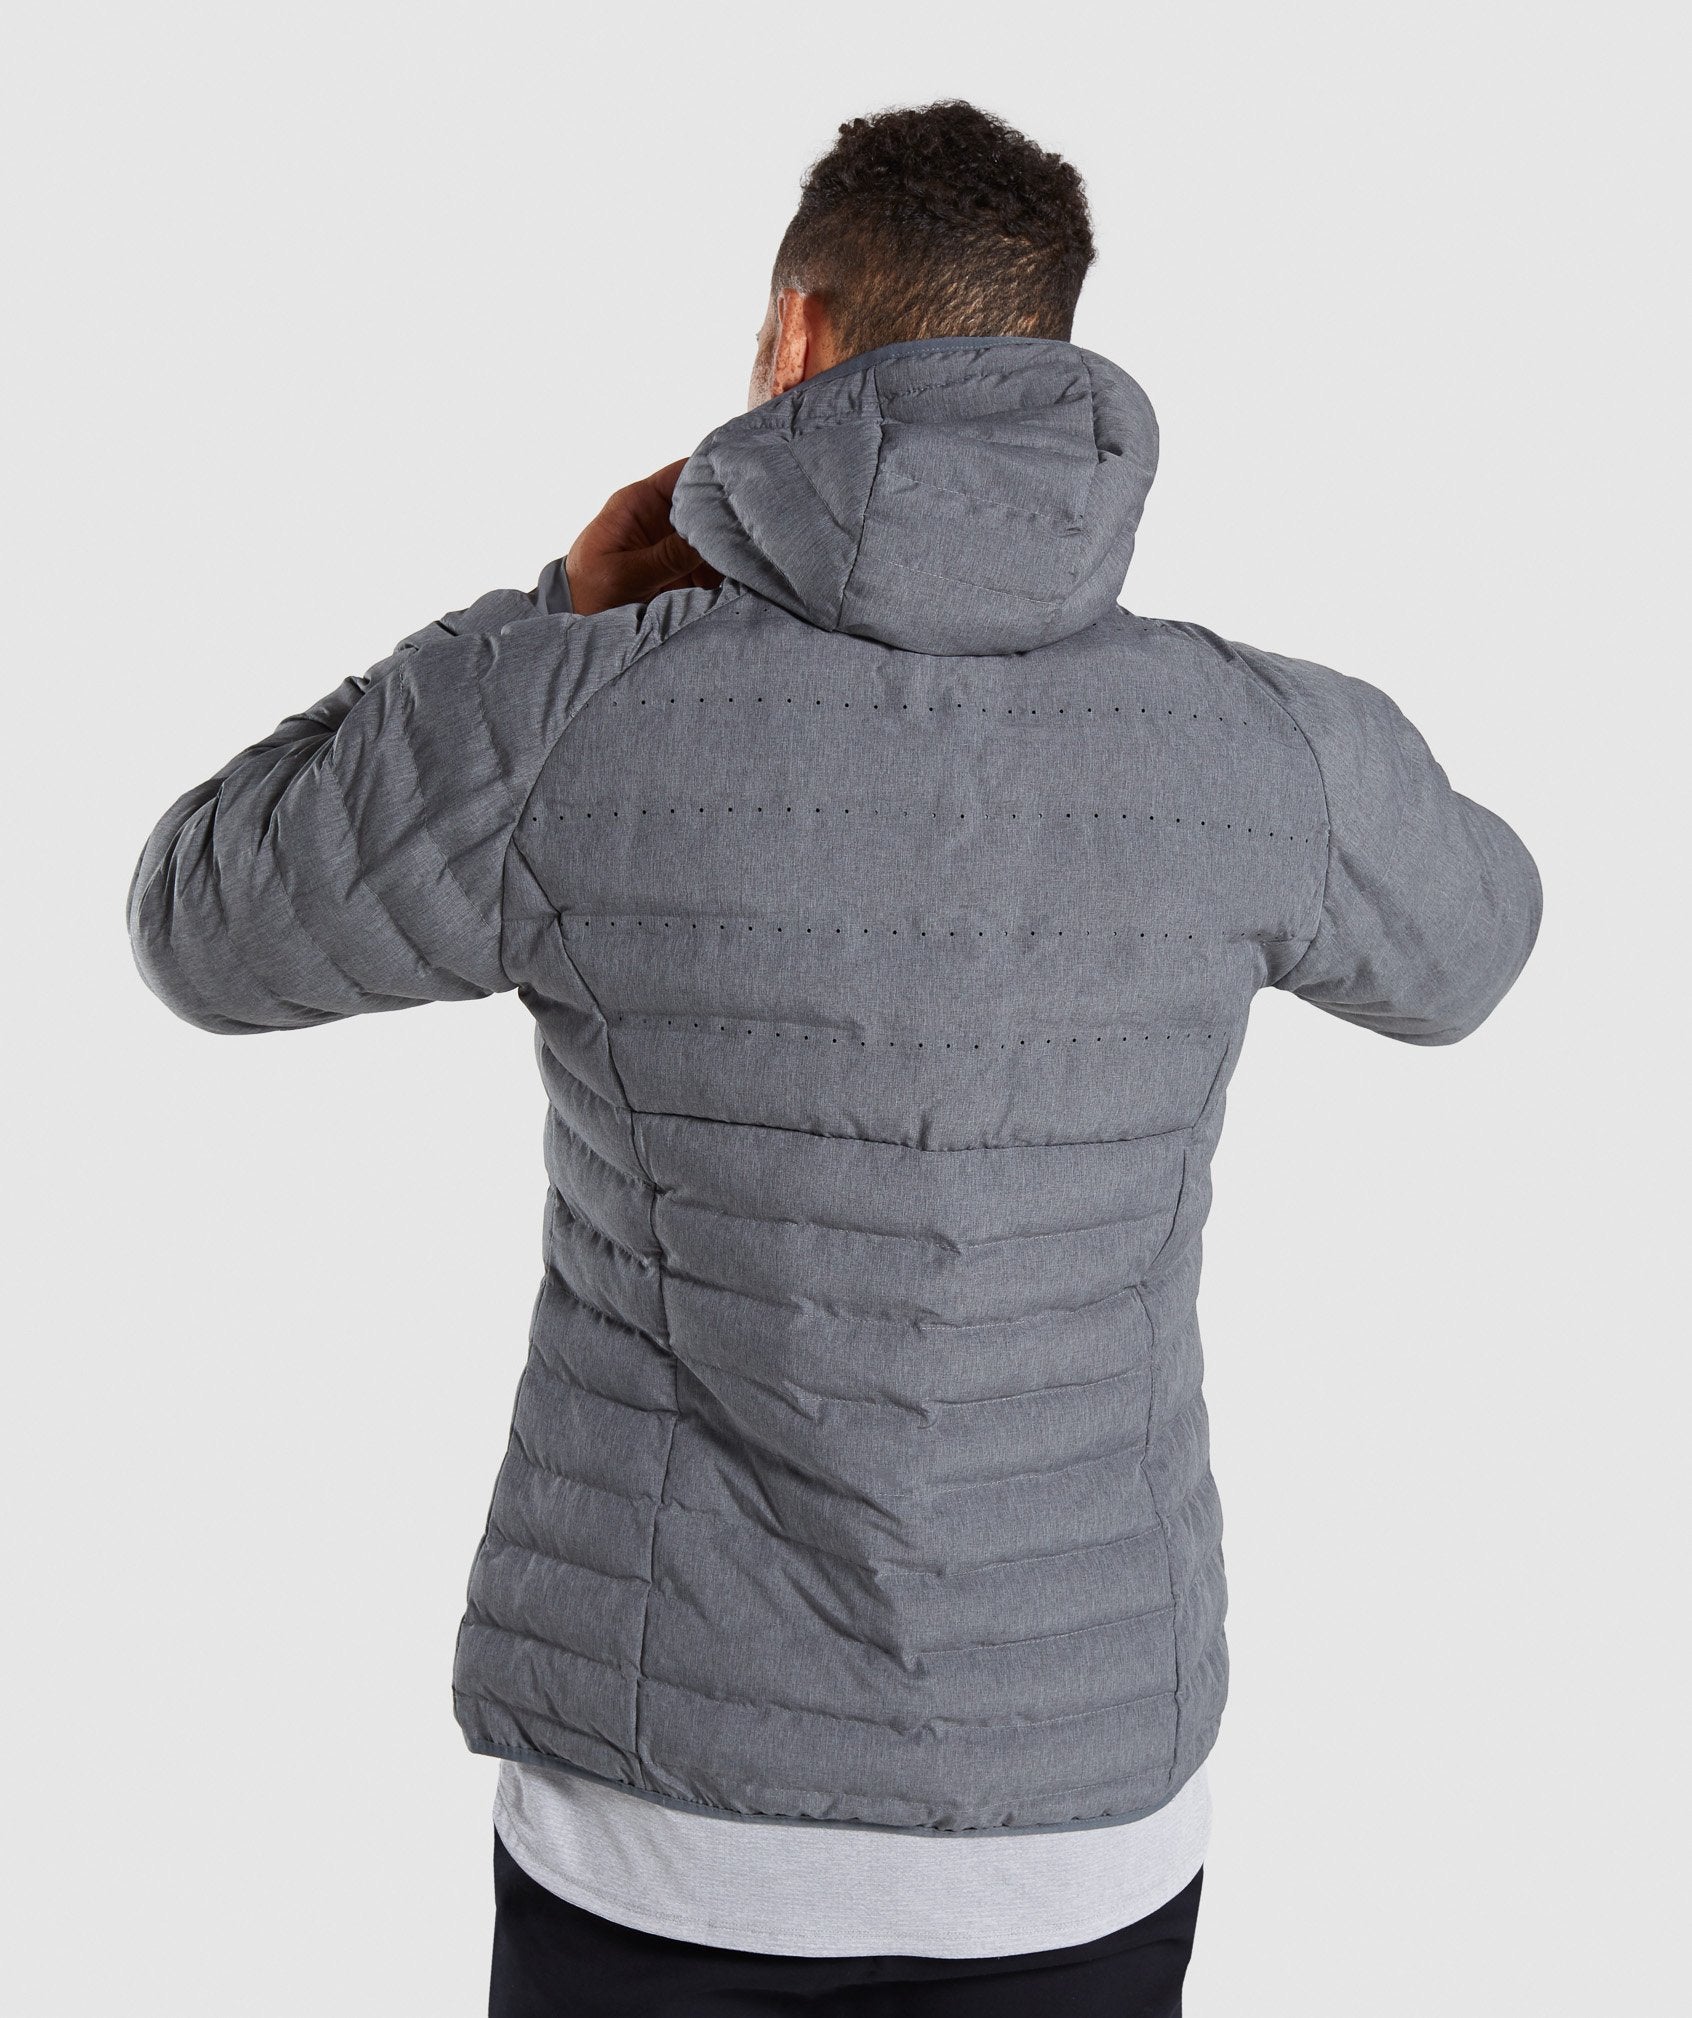 Sector Jacket V2 in Charcoal Marl - view 2